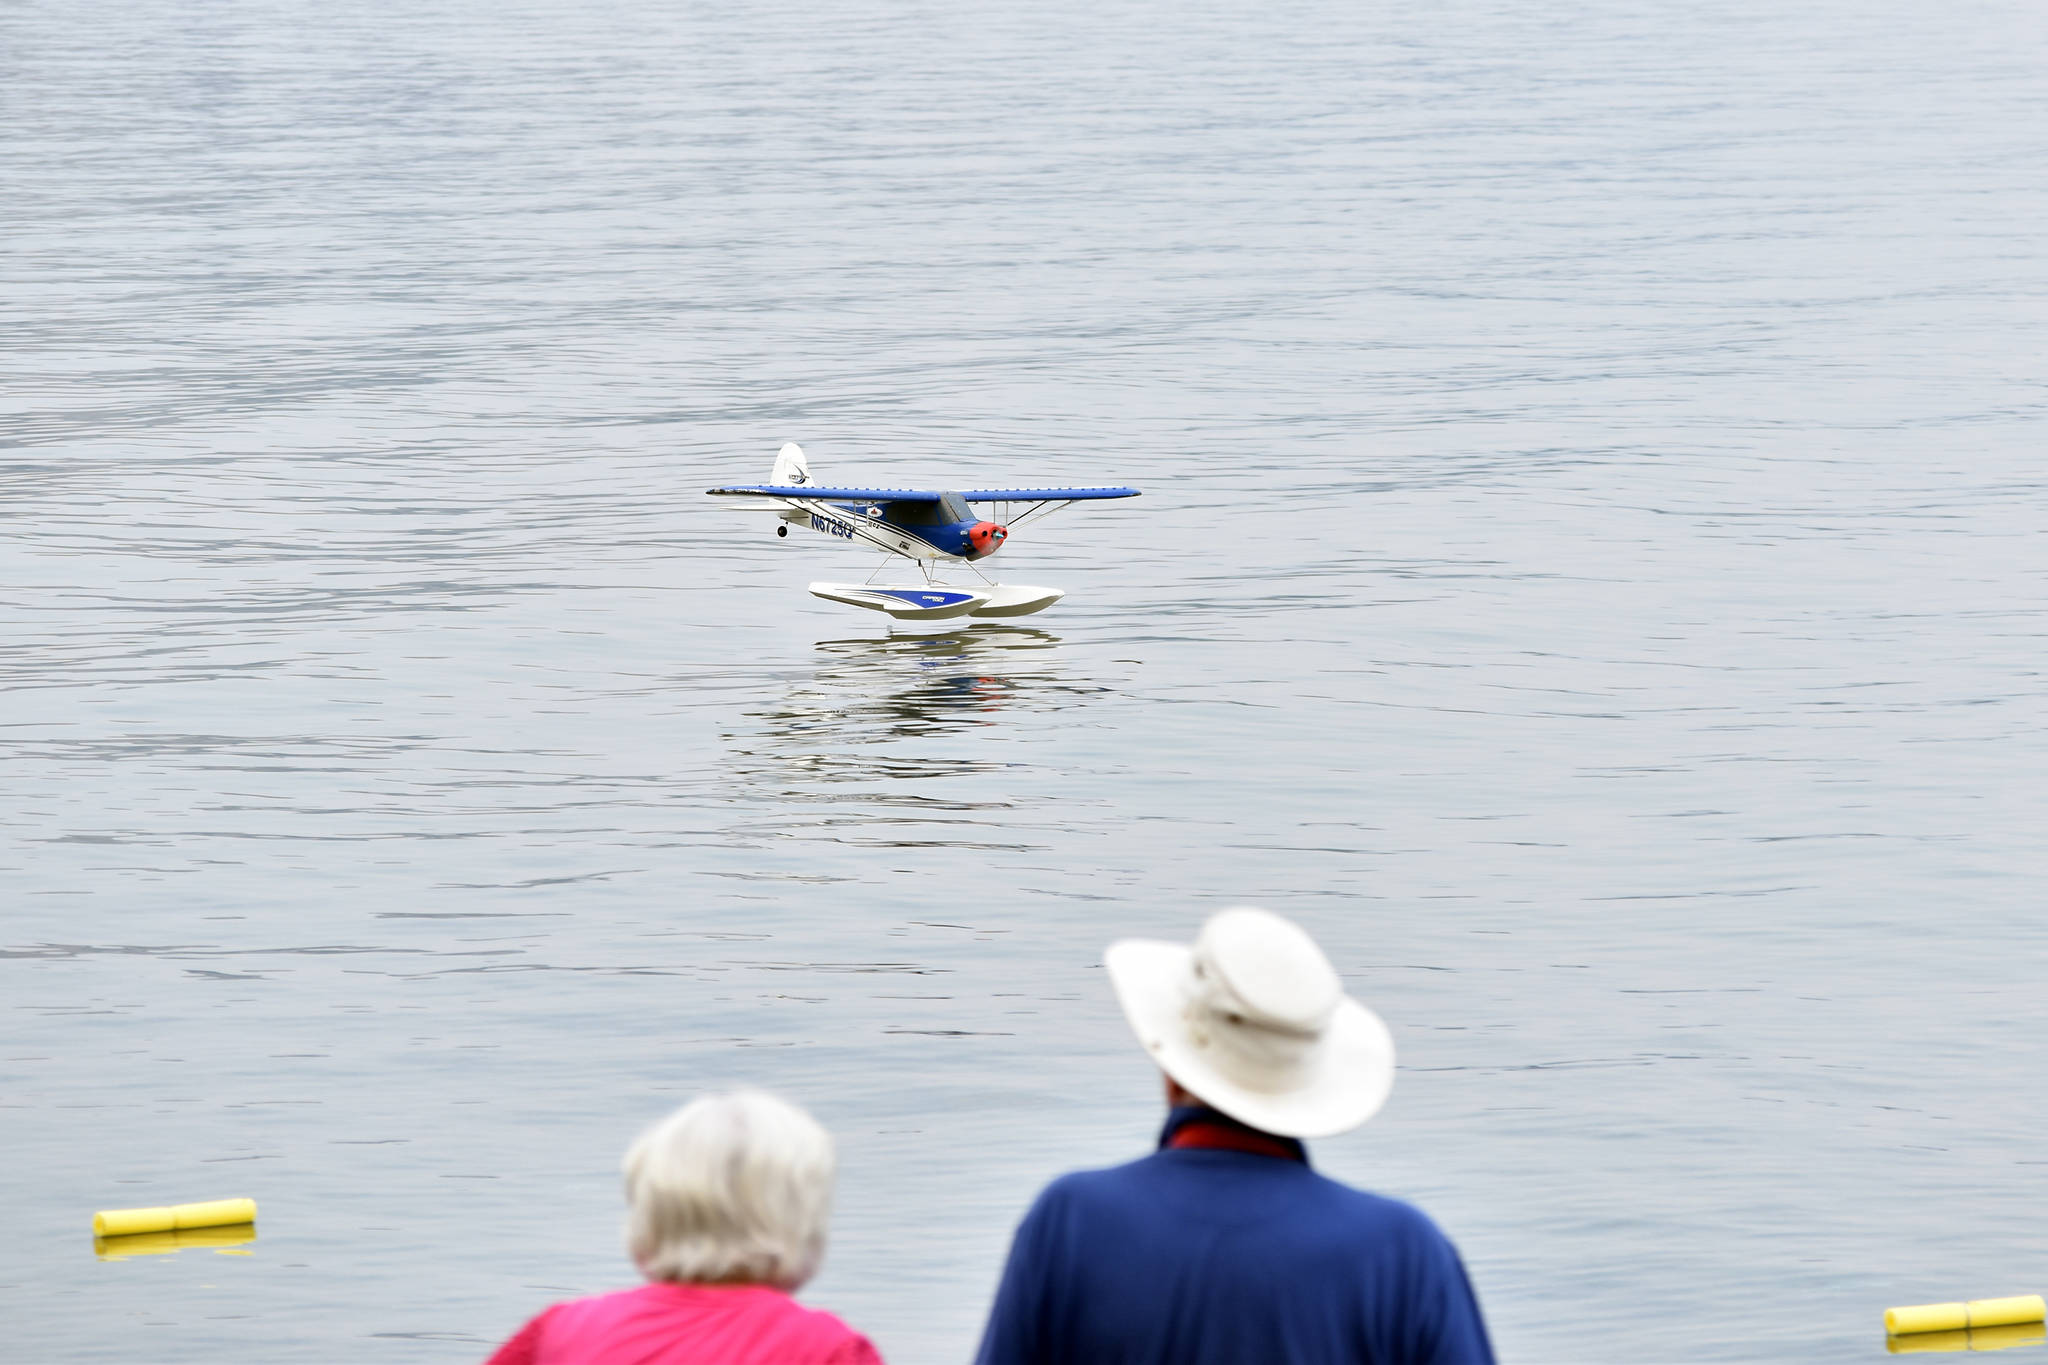 The planes of the Penticton Model Aviation Club took to the skies above Okanagan Lake on Sunday. (Brennan Phillips - Western News)